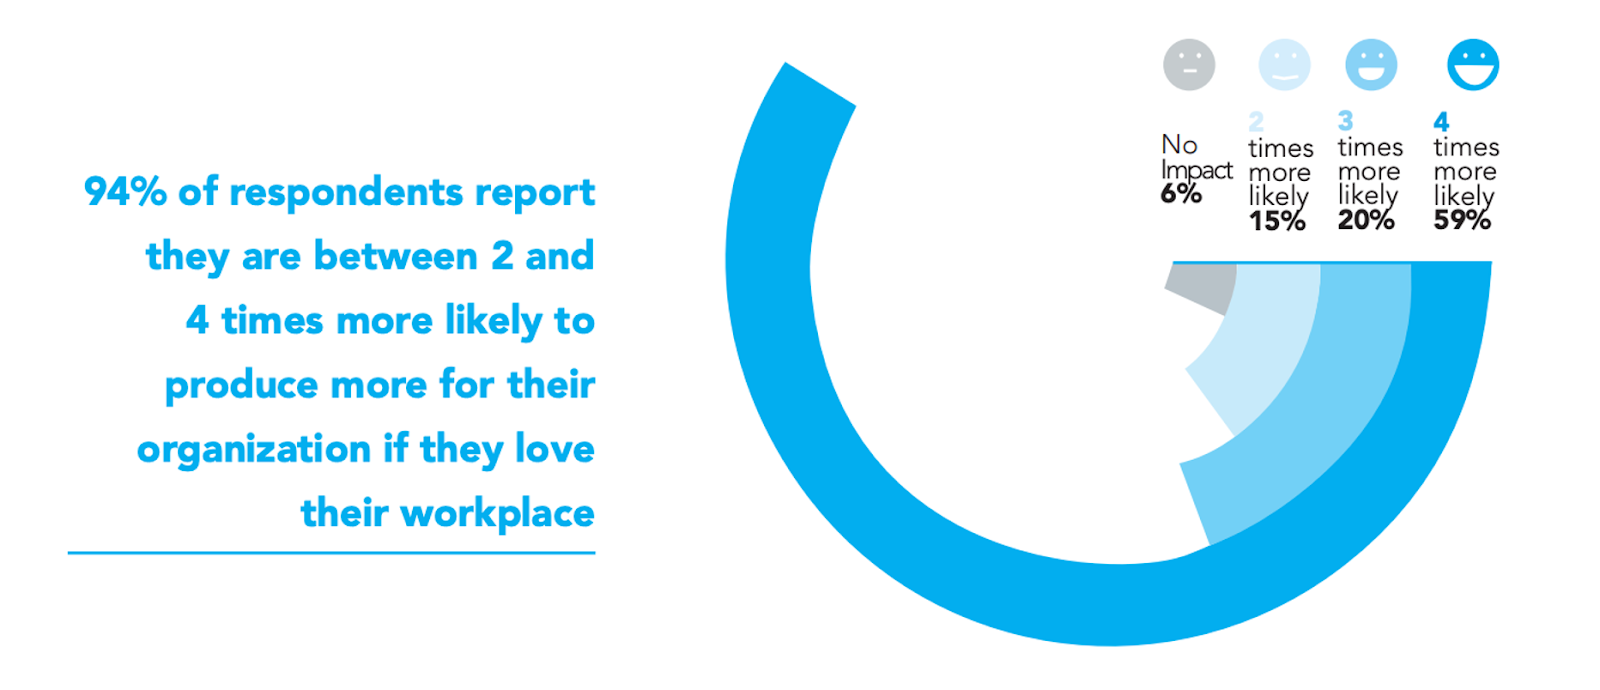 94% of respondents report they are between 2 and 4 times more likely to produce more for their organization if they love their workplace